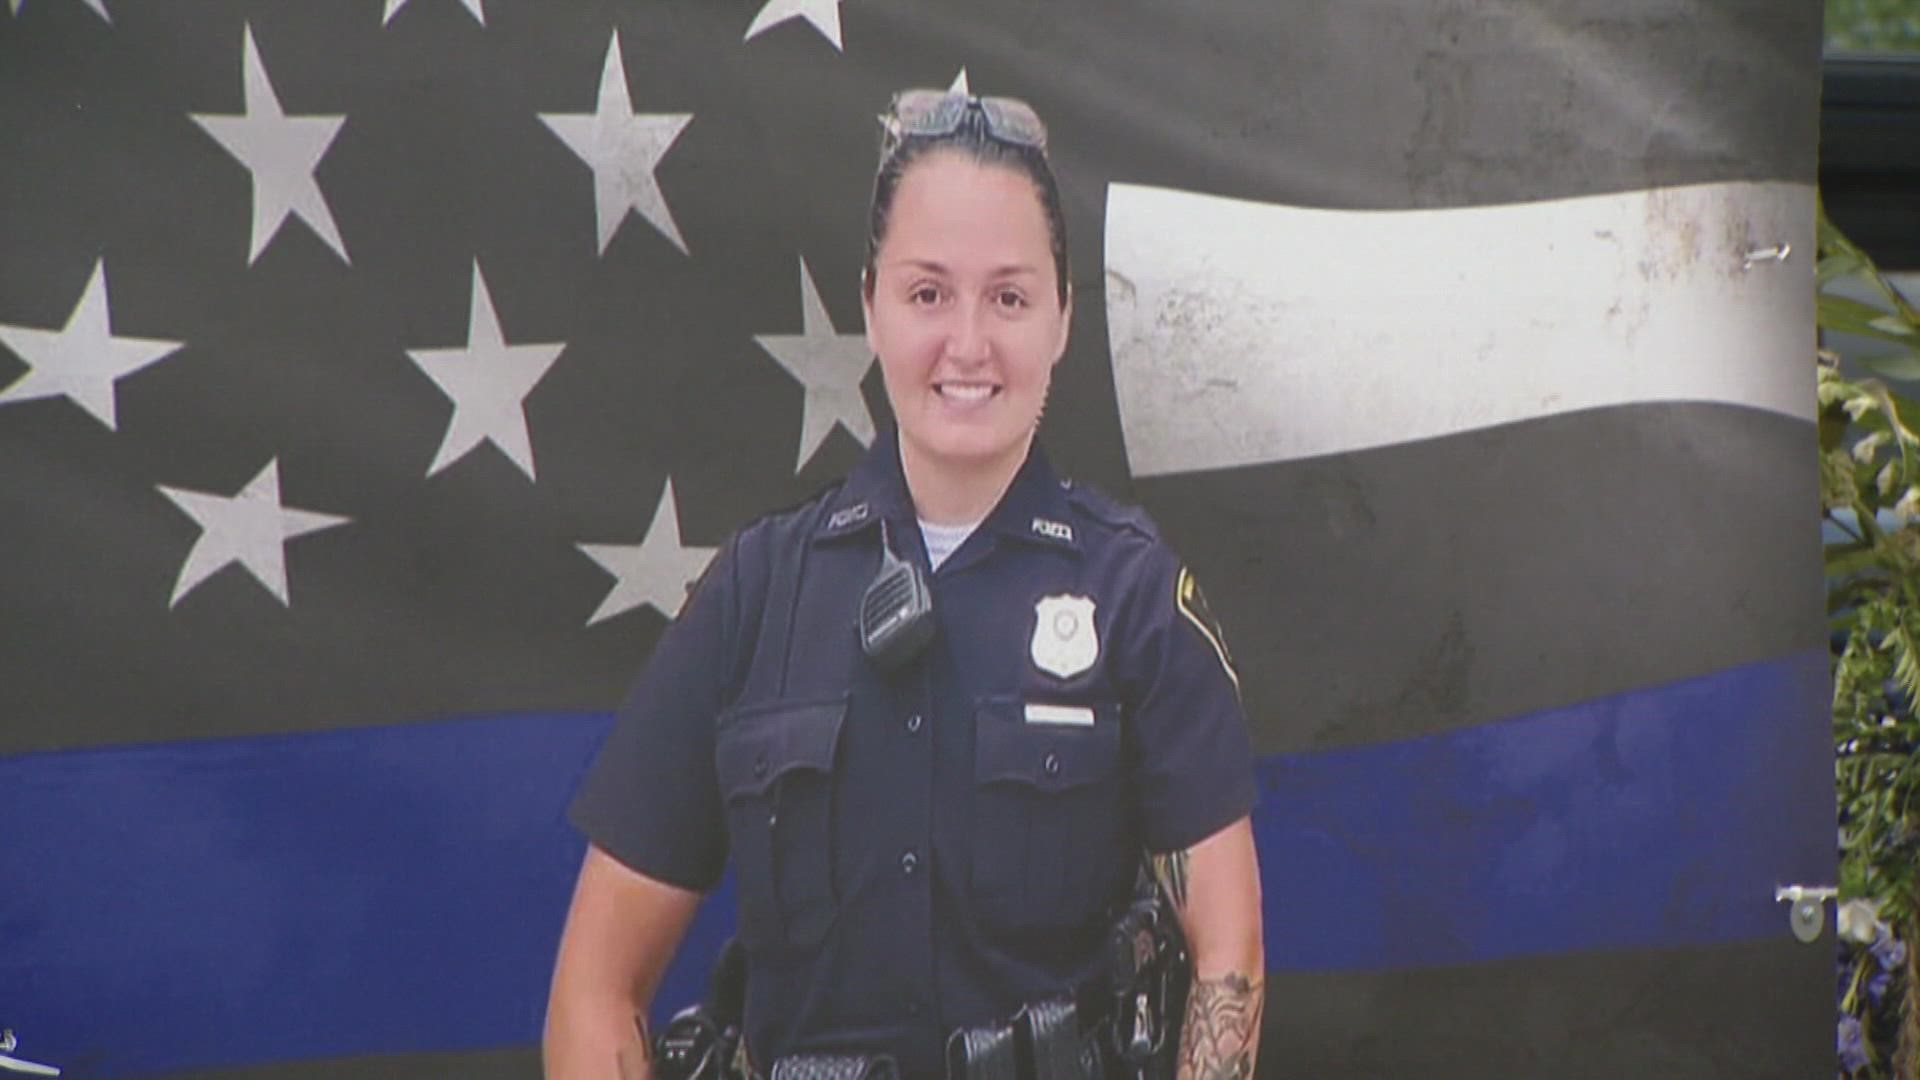 Family, friends and fellow officers are saying goodbye to Richmond Officer Seara Burton at a burial service at Crown Hill Cemetery.